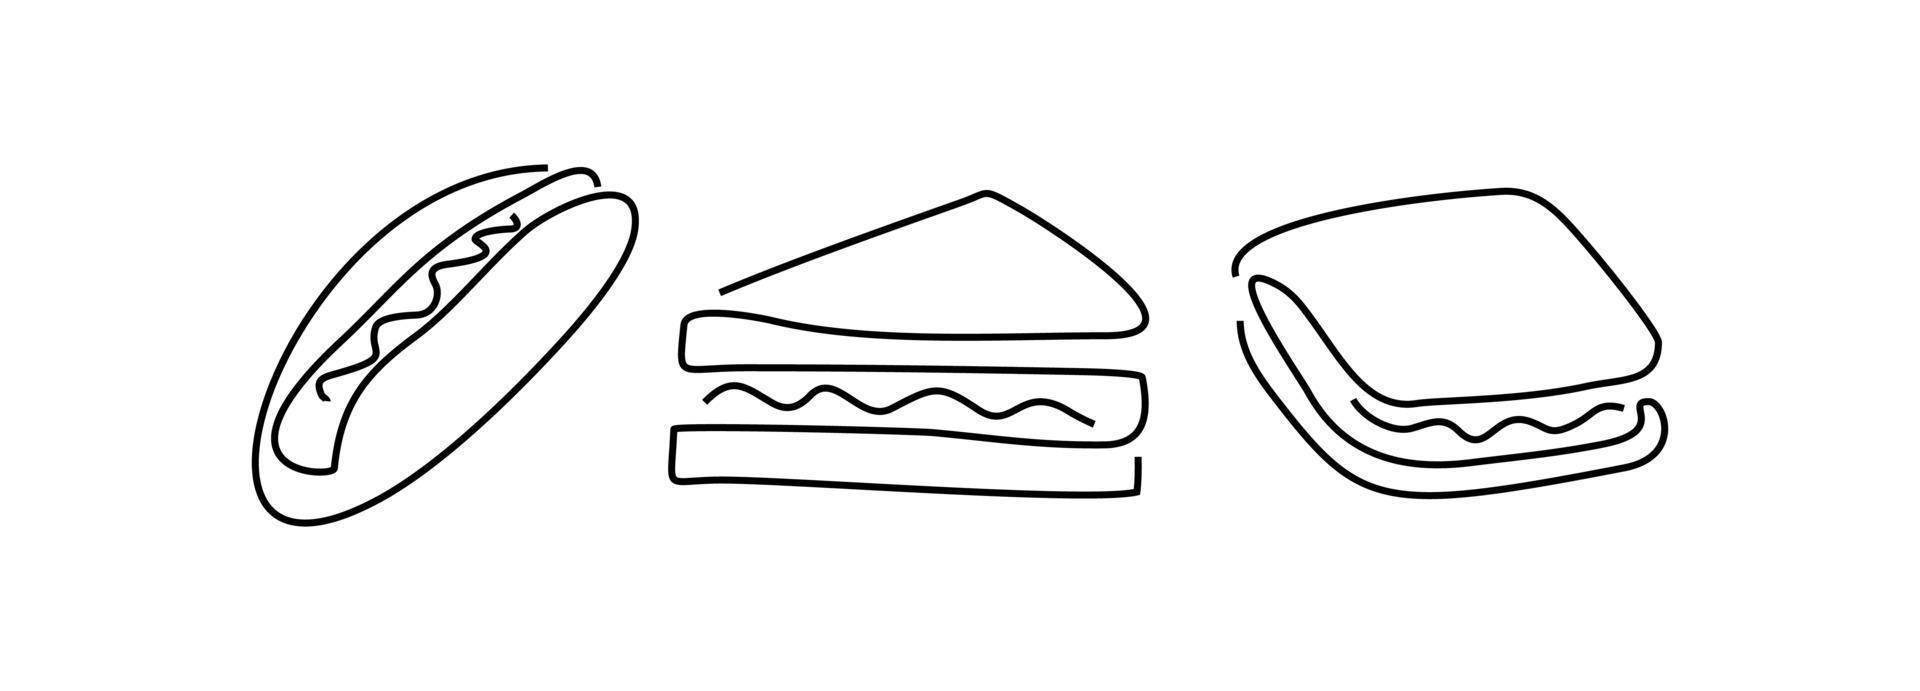 fast food one line. sandwiches vector illustration. sandwich, hot dog - amazing art. breakfast, cafe. bun and stuffing